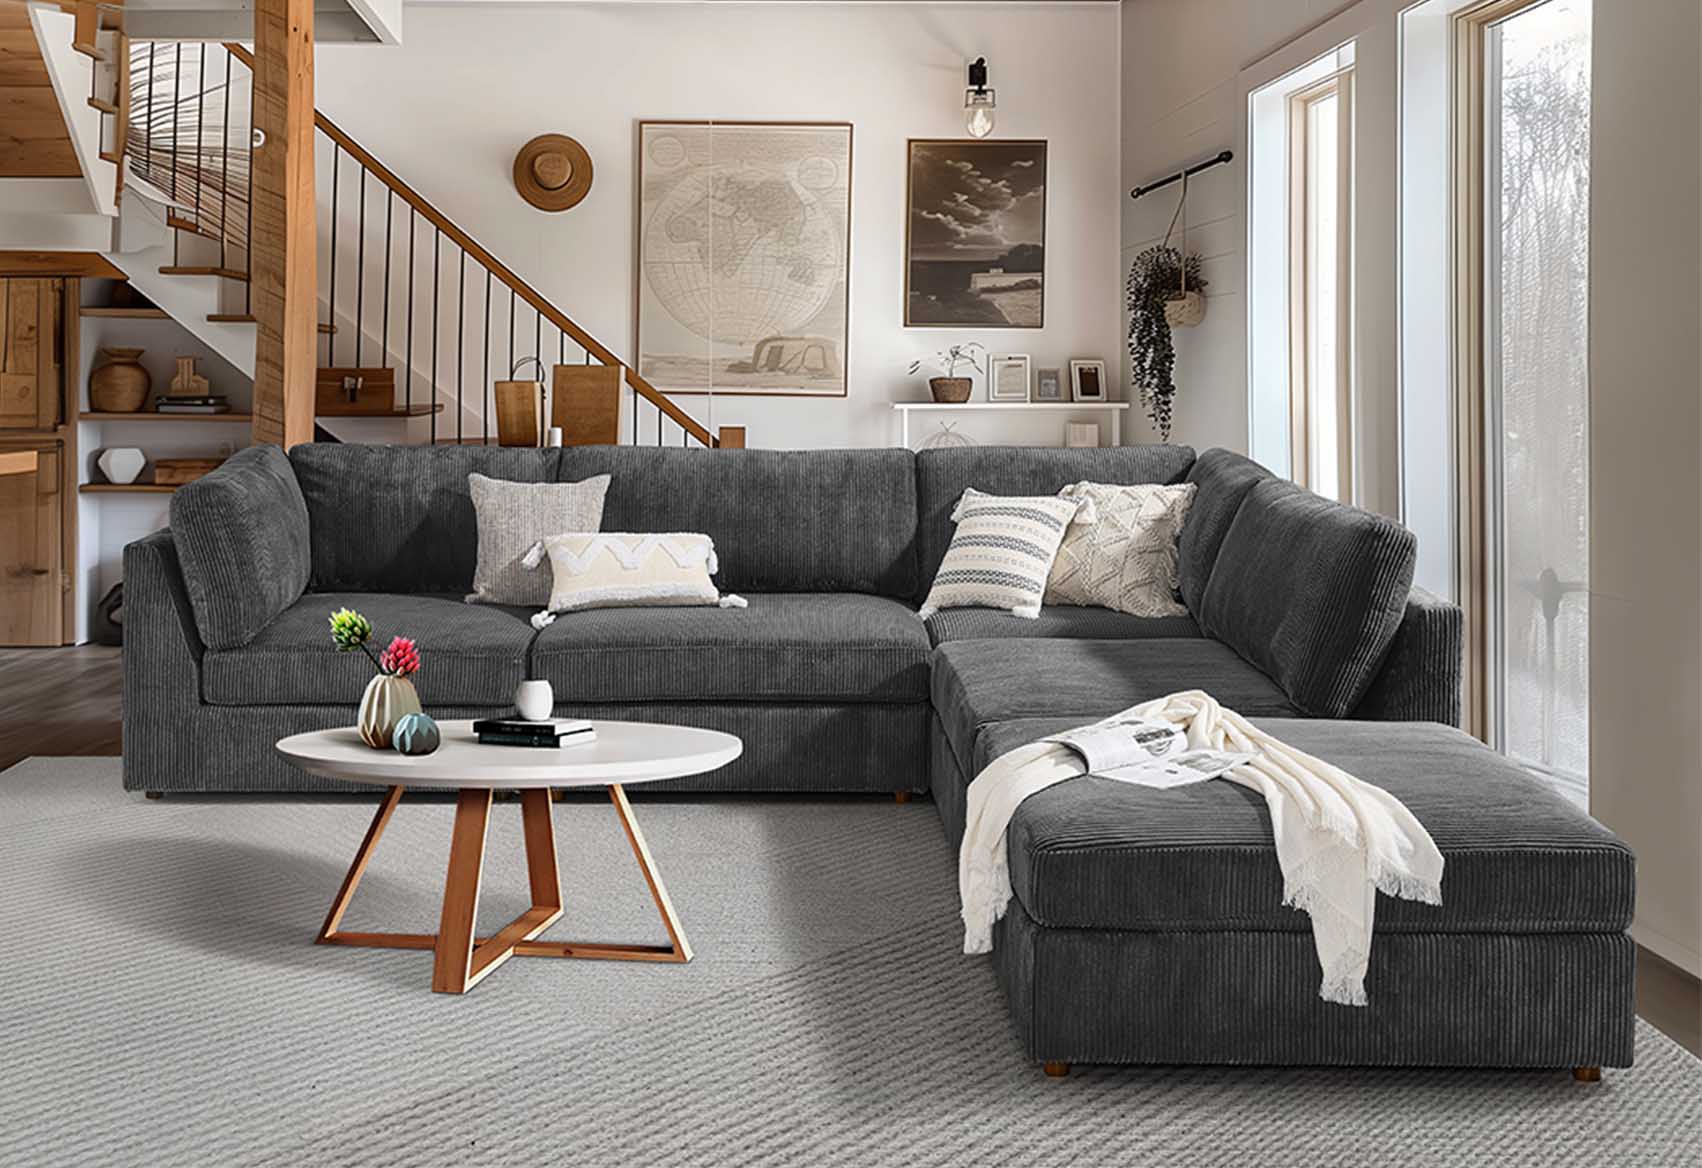 Benefits of Placing Modular Sectional Sofas in Your Living Room